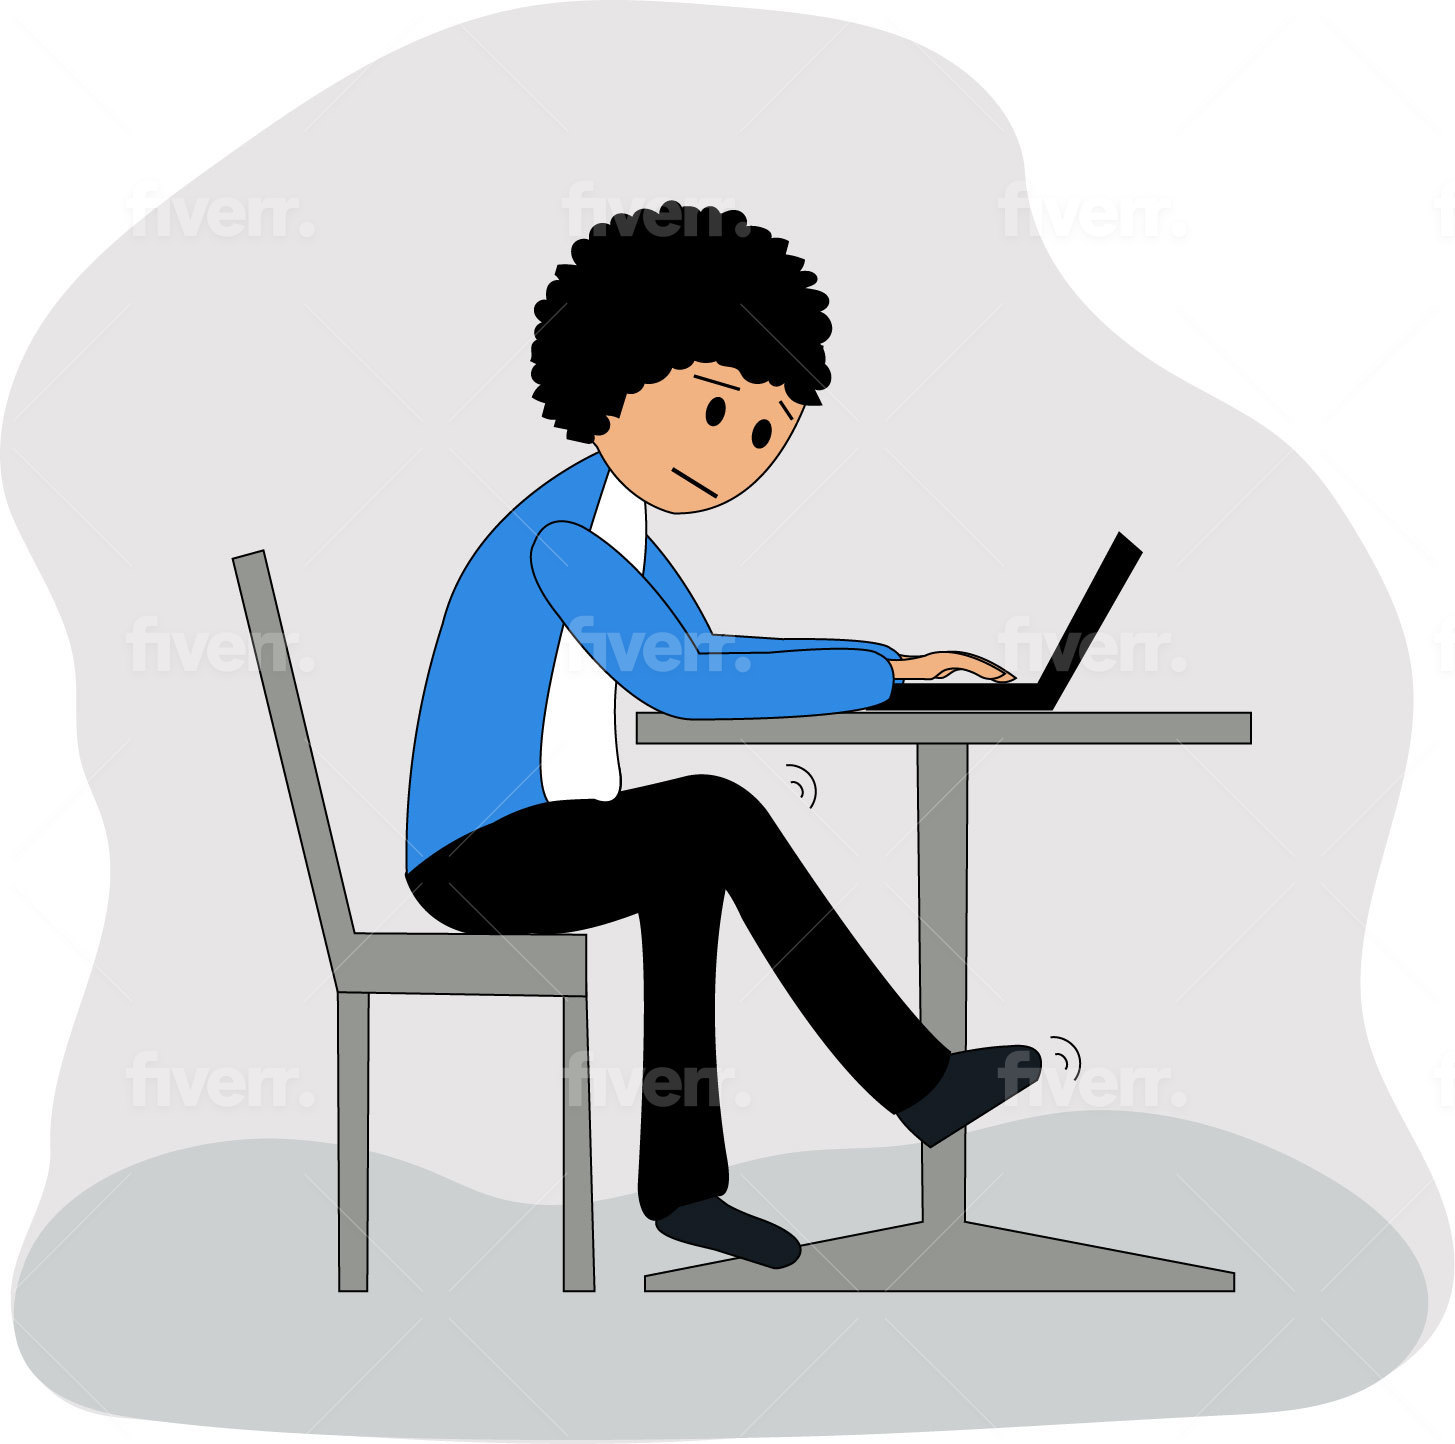 restless guy with jiggly legs sitting at computer illustrating that self-regulation training needs to happen to curb the fidgetiness